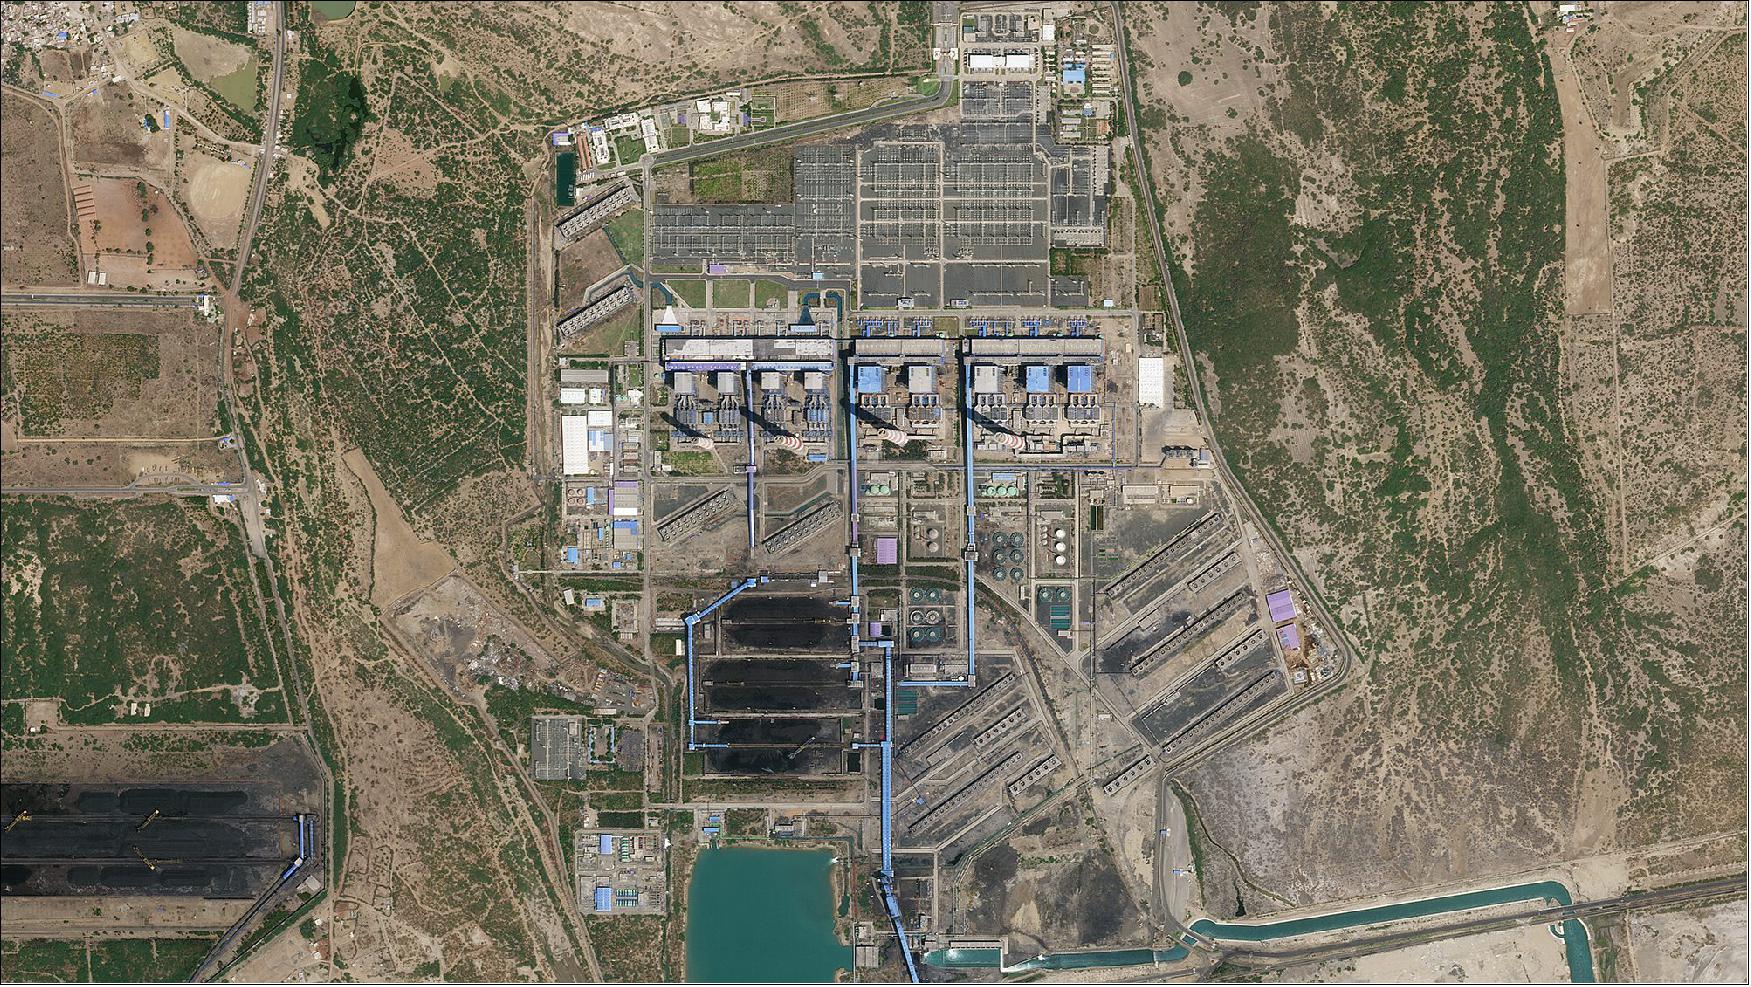 Figure 16: 50 cm SkySat imagery of the Mundra Power Plant in Gujarat, India, acquired on April 4, 2020 (image credit: © 2020, Planet Labs Inc. All Rights Reserved)